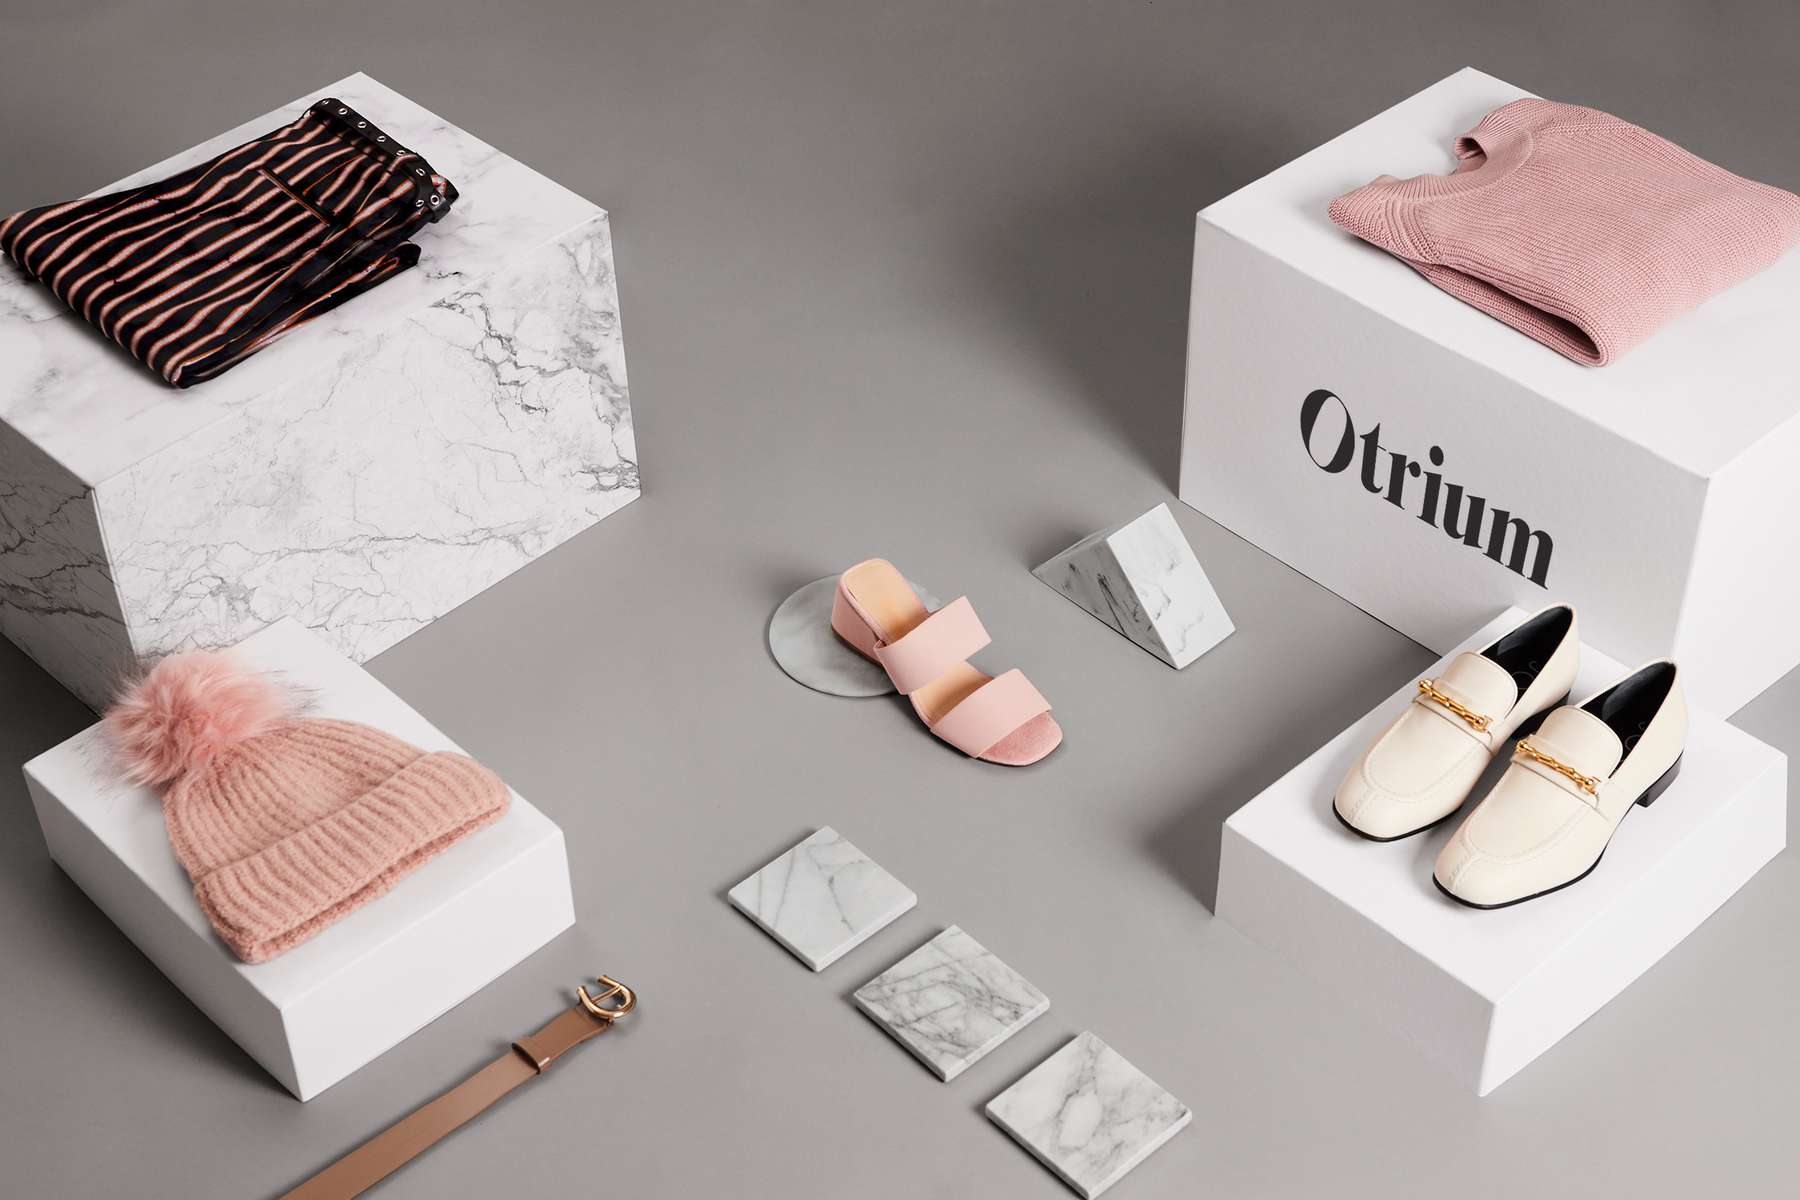 Otrium aims to help fashion brands solve the unsold inventory problem